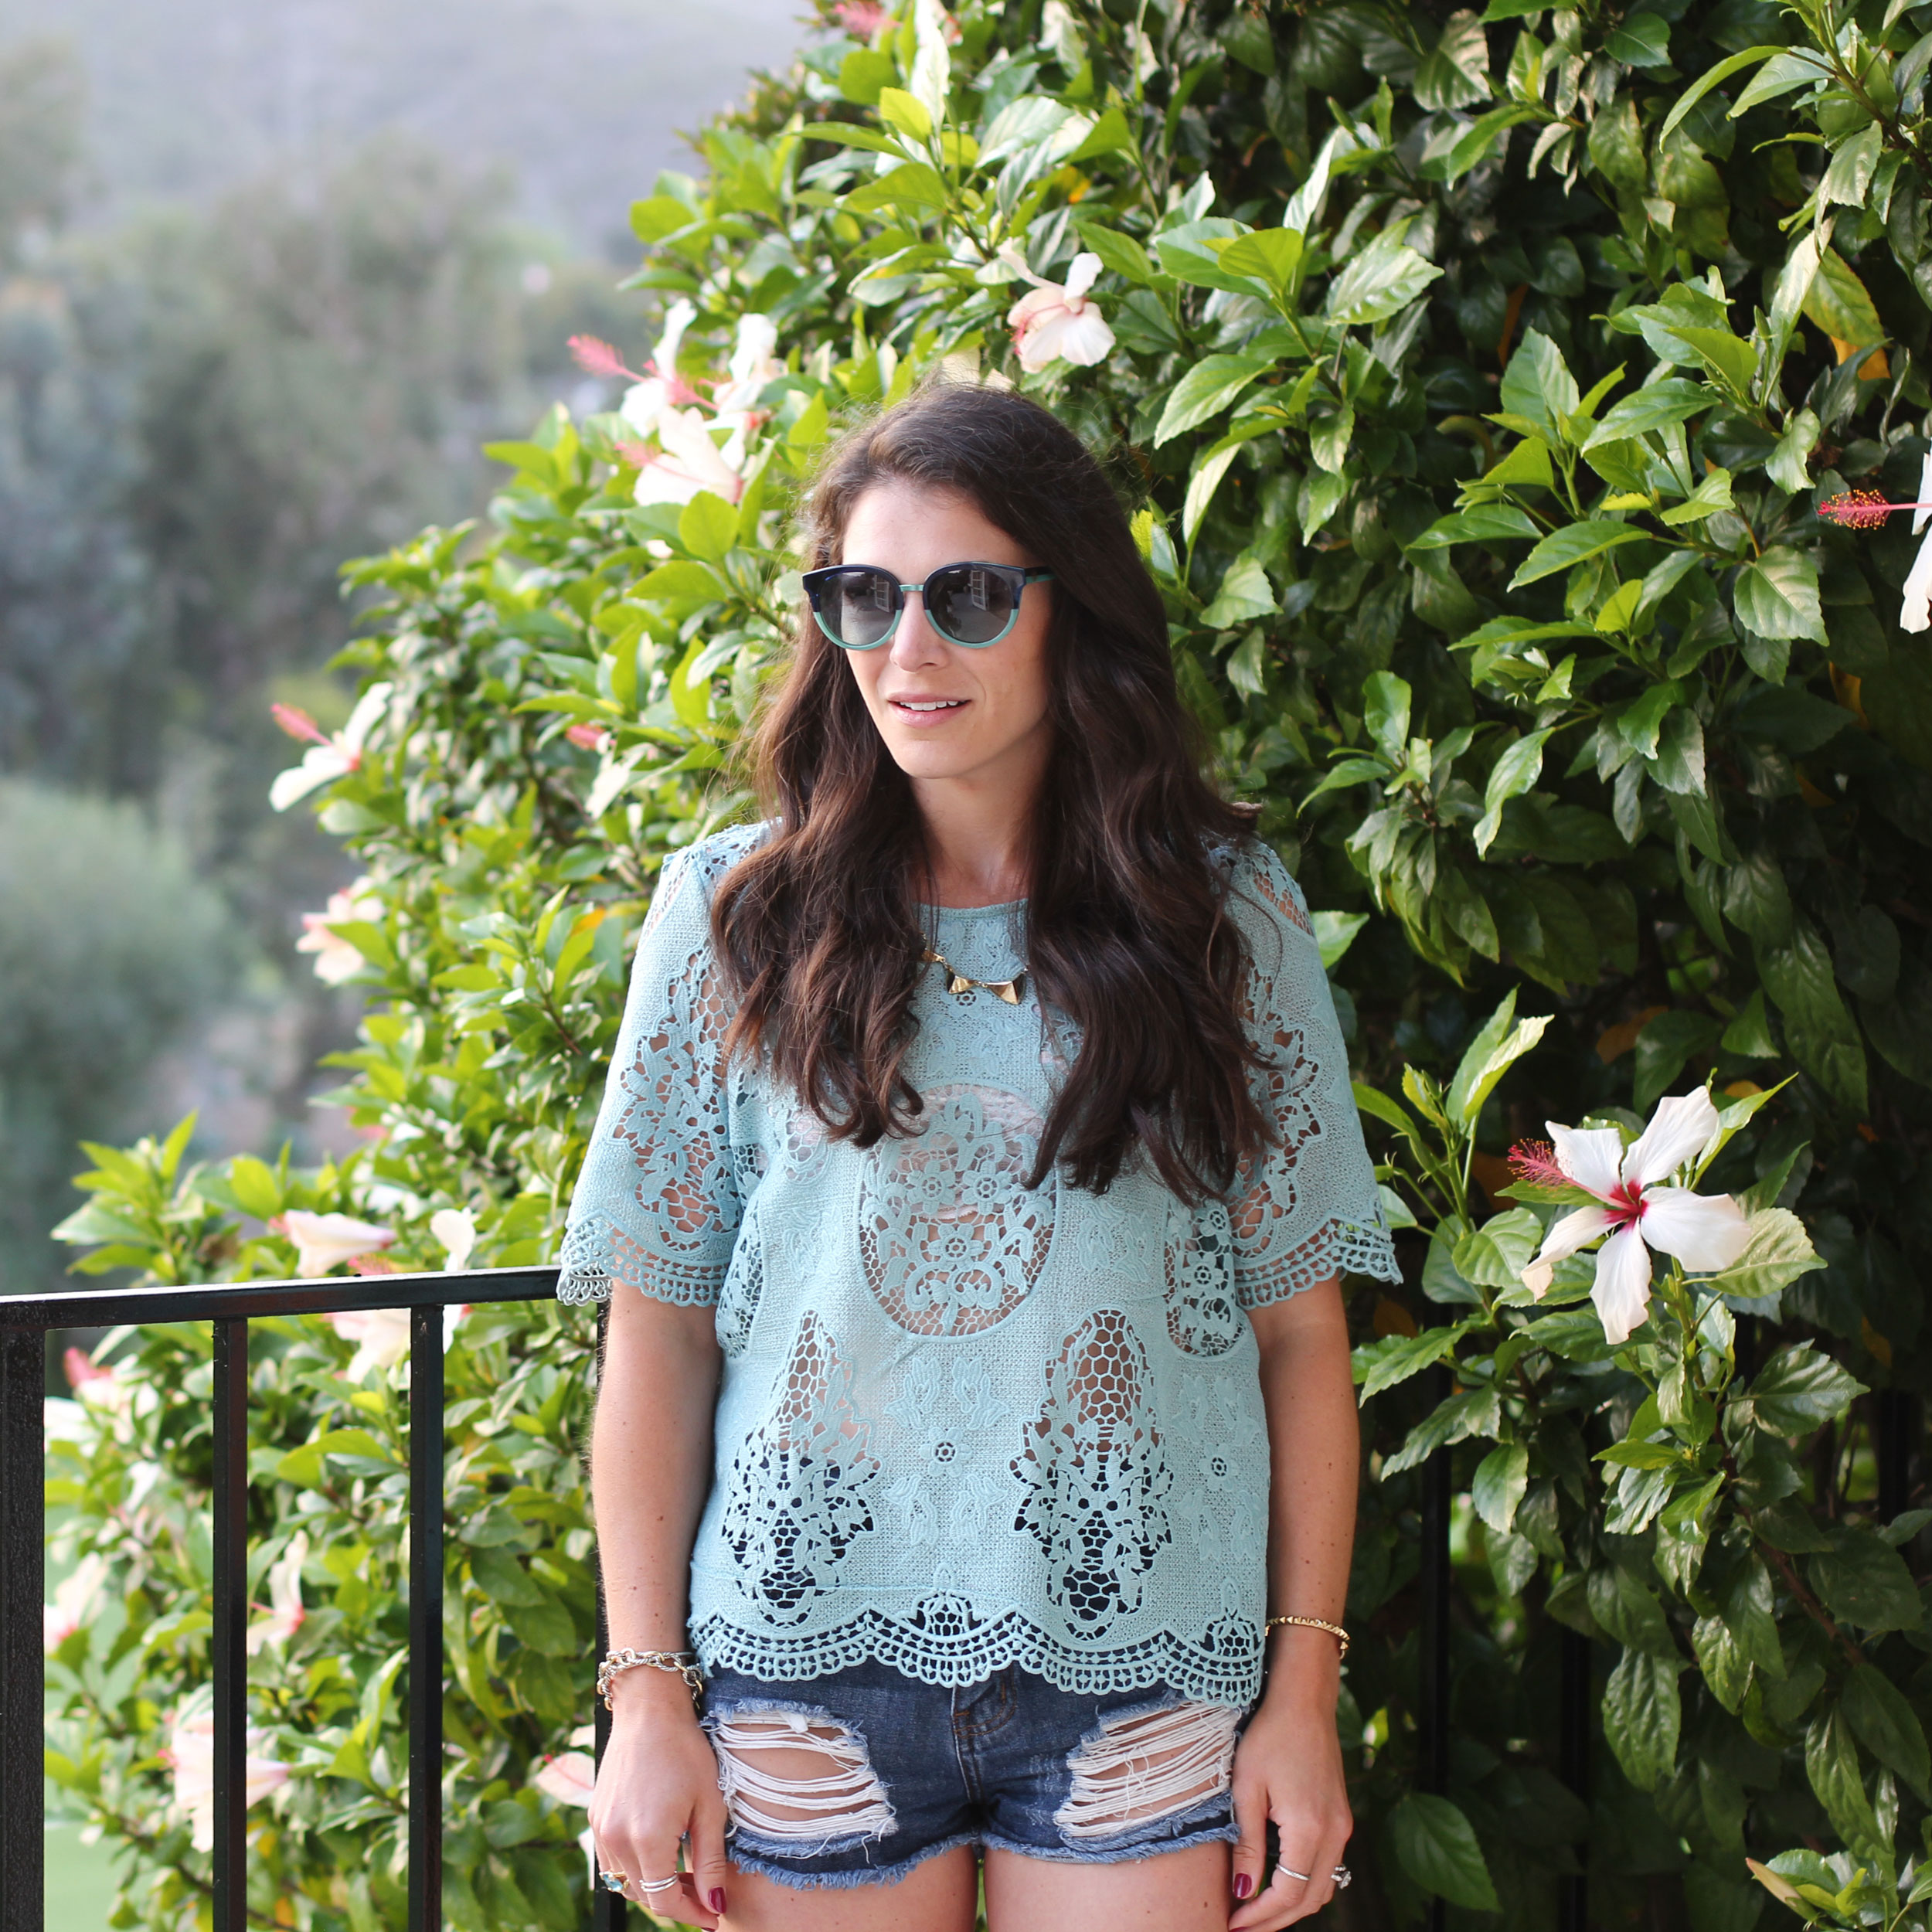 J.O.A Lace Top, Tory Burch Sunglasses, House of Harlow 1960 Necklace, Cutoff Jean Shorts, Ankle Wrap Sam Edelman Sandals, Nude Sandals, Fashion Blogger Summer Style 